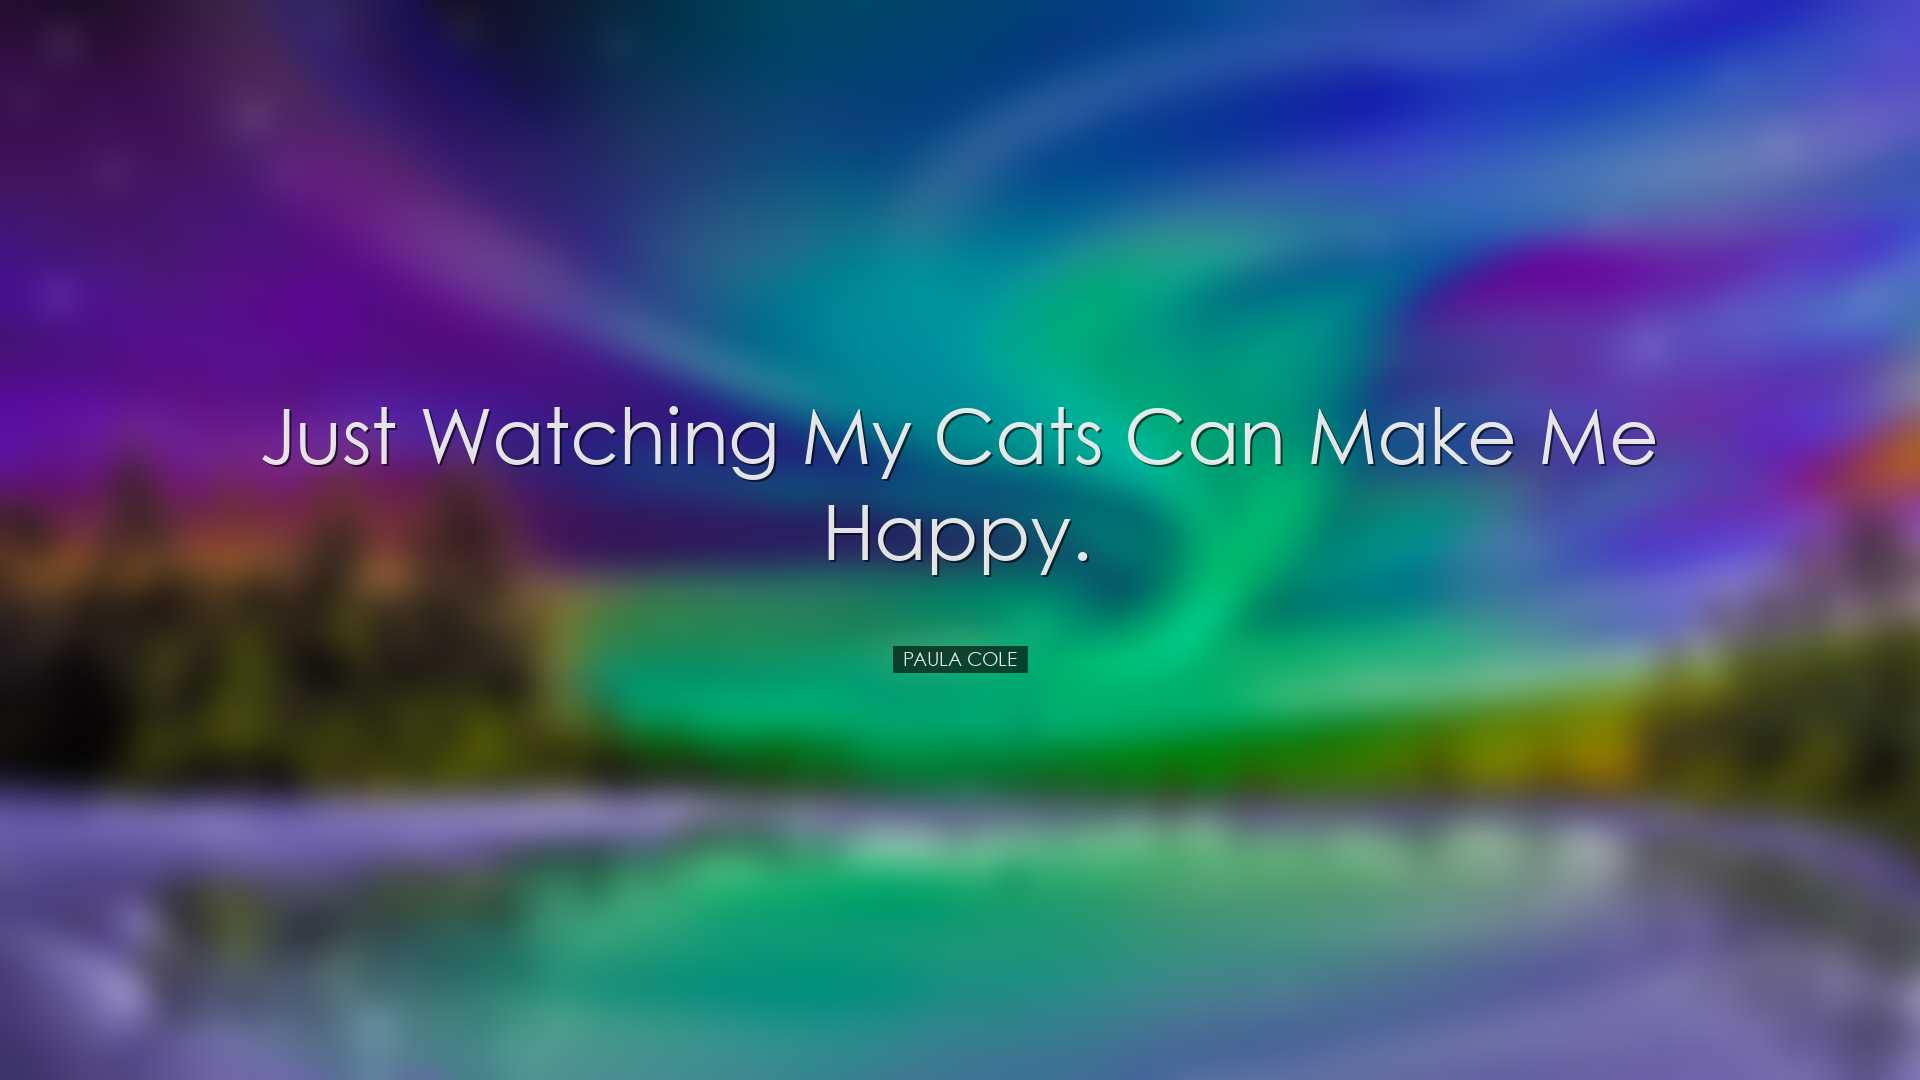 Just watching my cats can make me happy. - Paula Cole